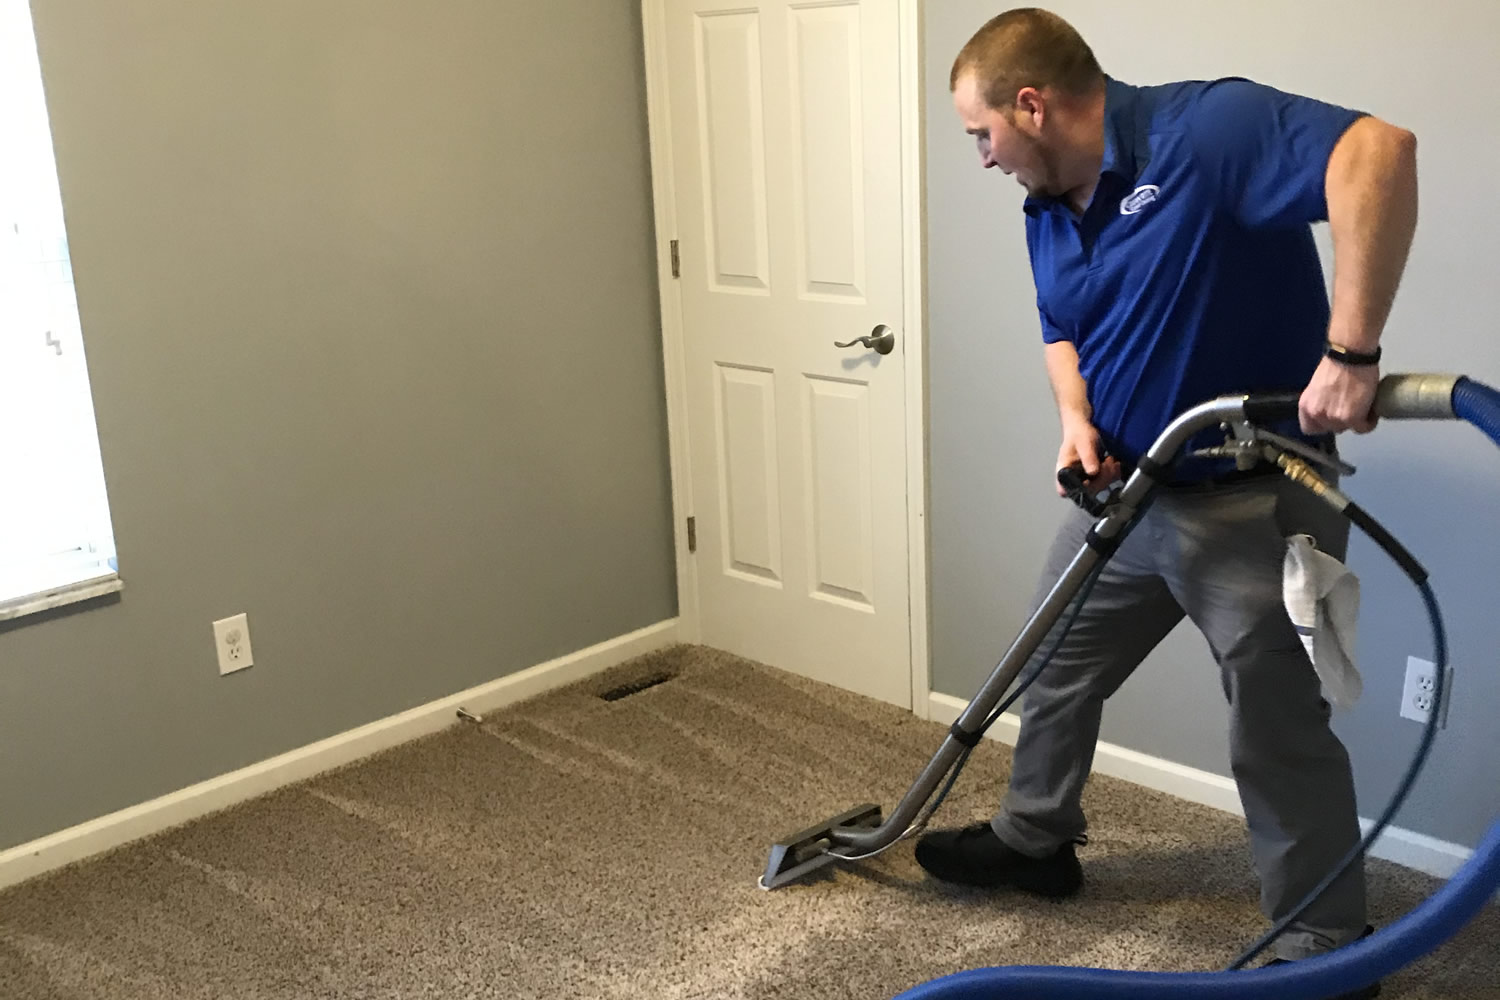 carolina-clean-pro-carpet-cleaning-upholstery-tile-grout-cleaning-hard-floor-hardwood-floor-cleaning-service-for-Garner-Raleigh-Cary-Clayton-Smithfield-Johnston-County-Wake-County-NC-13